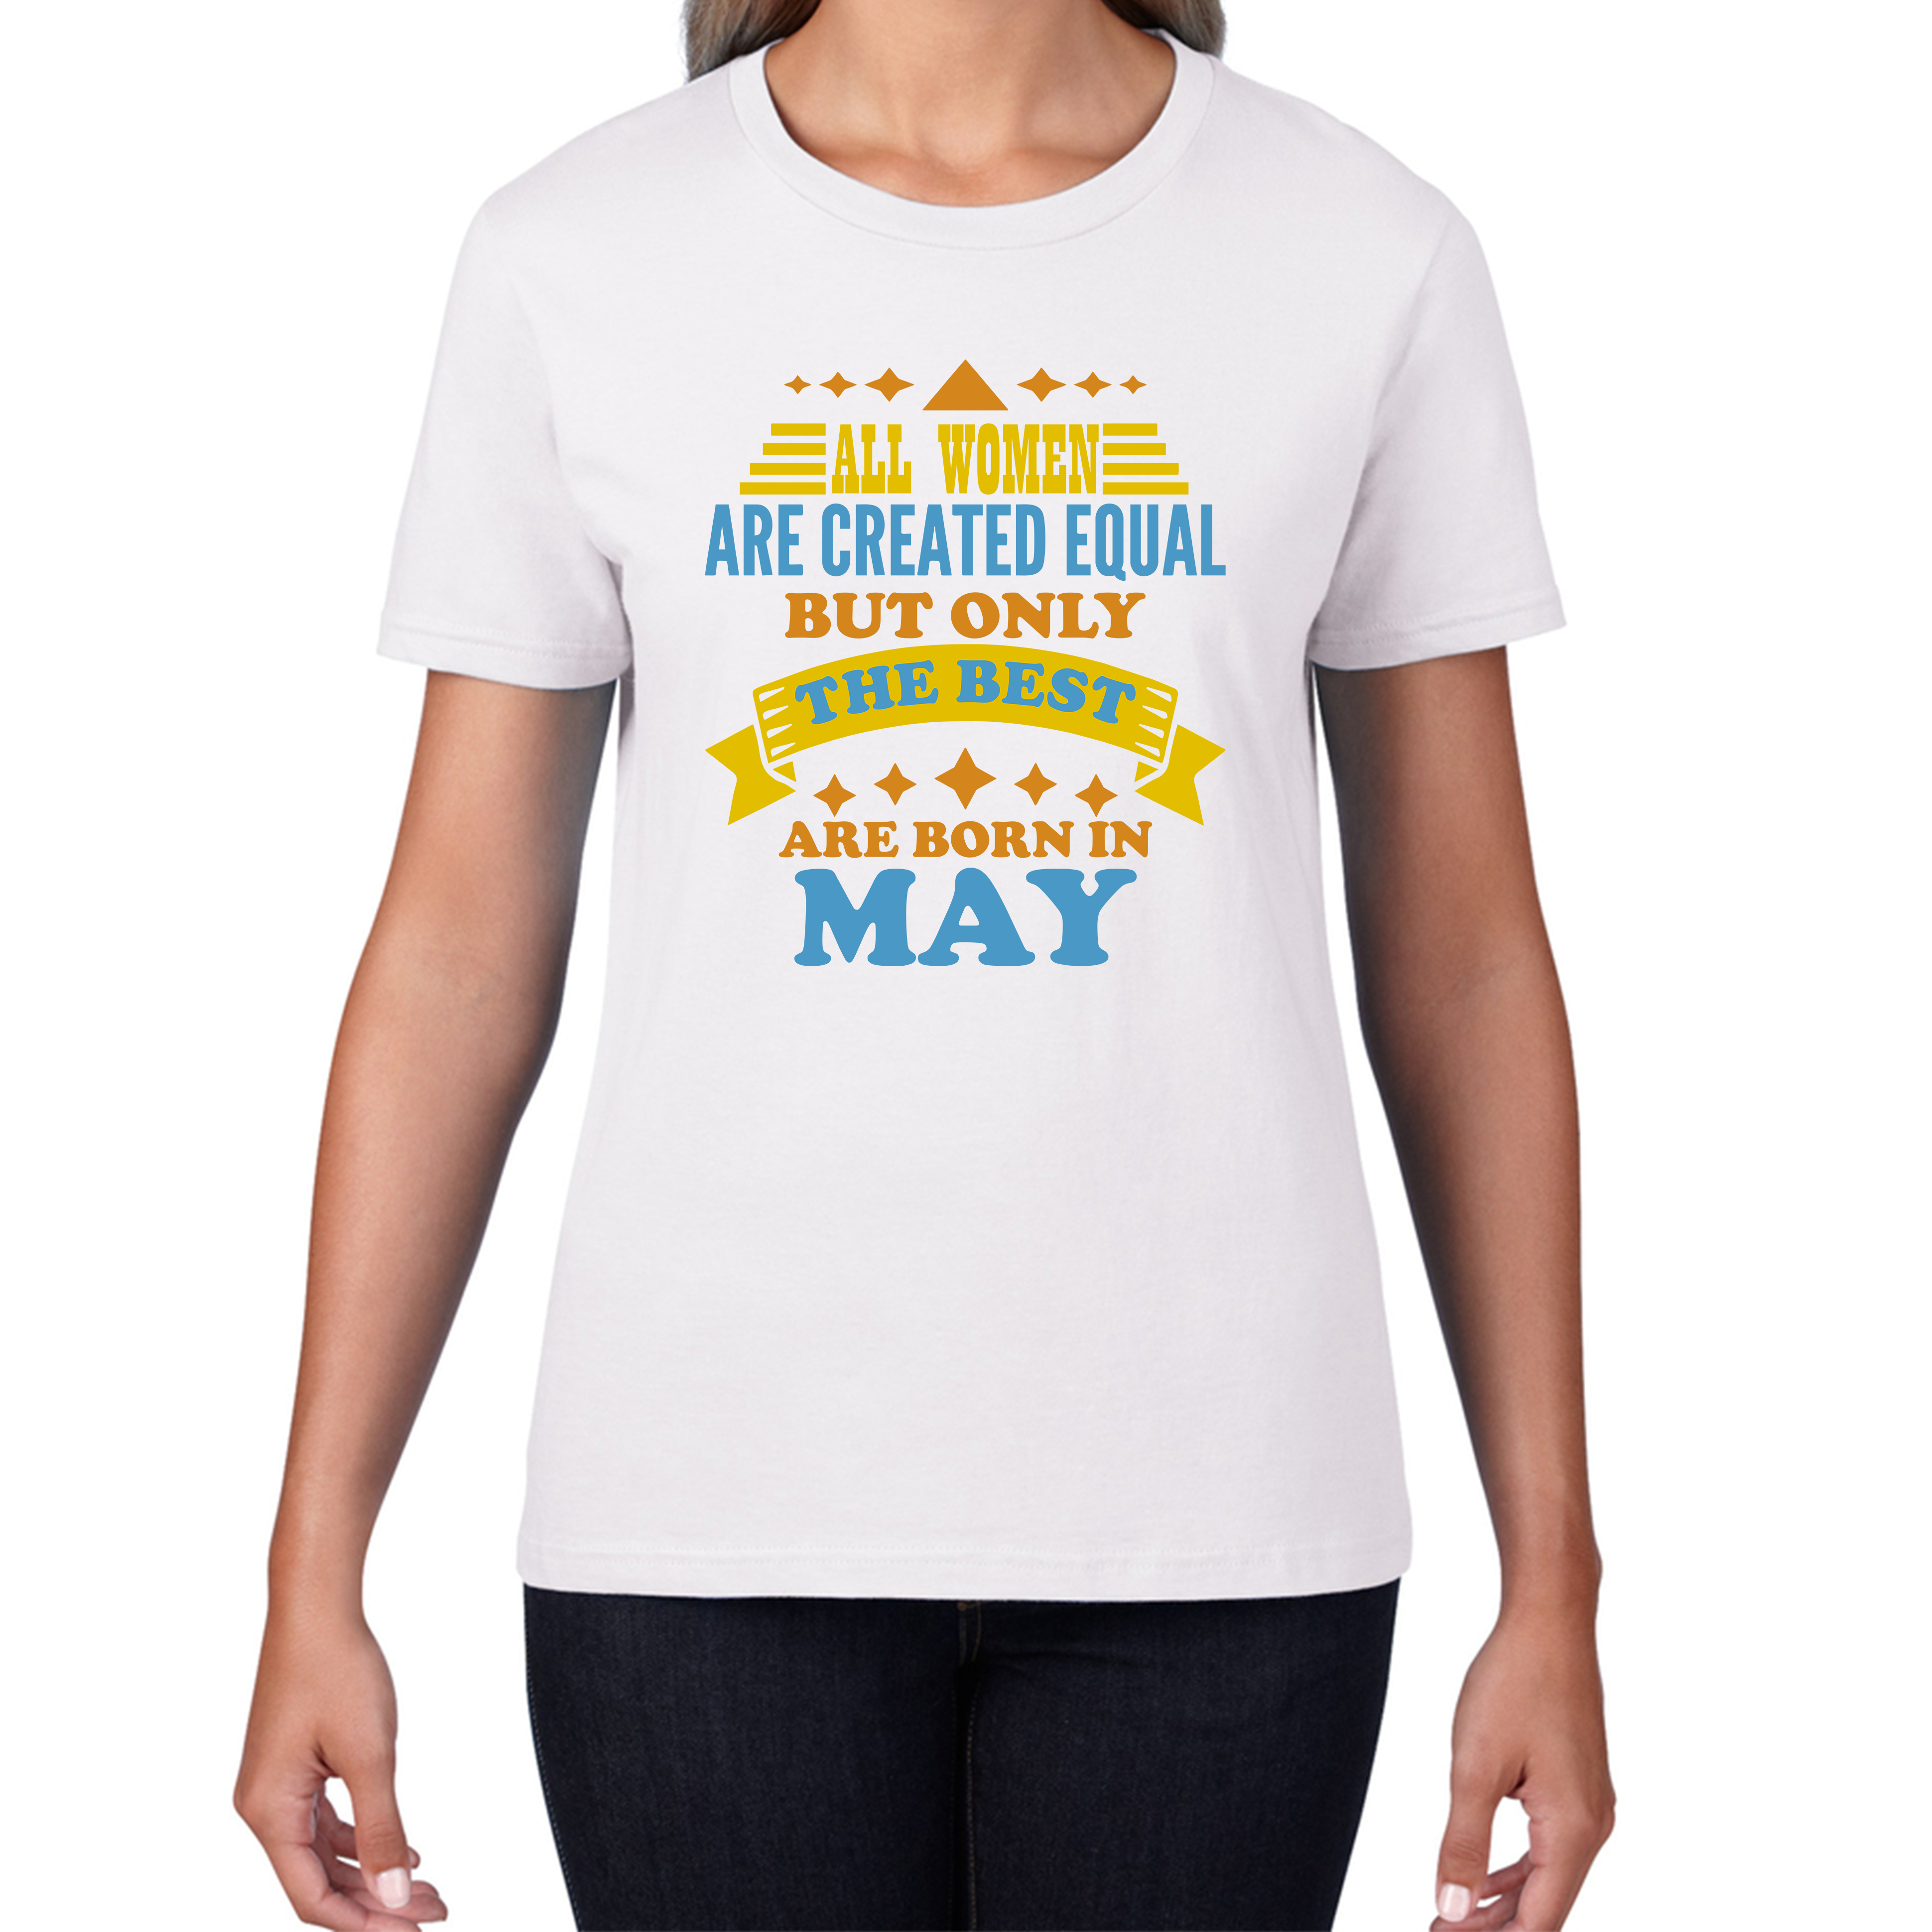 All Women Are Created Equal But Only The Best Are Born In May Funny Birthday Quote Womens Tee Top